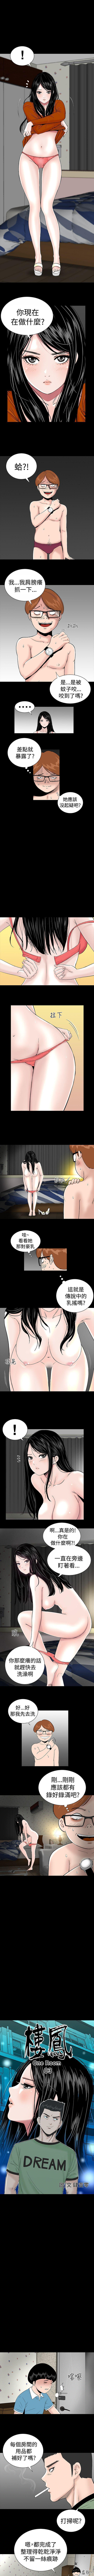 Perrito 樓鳳 1-48 Officesex - Page 11